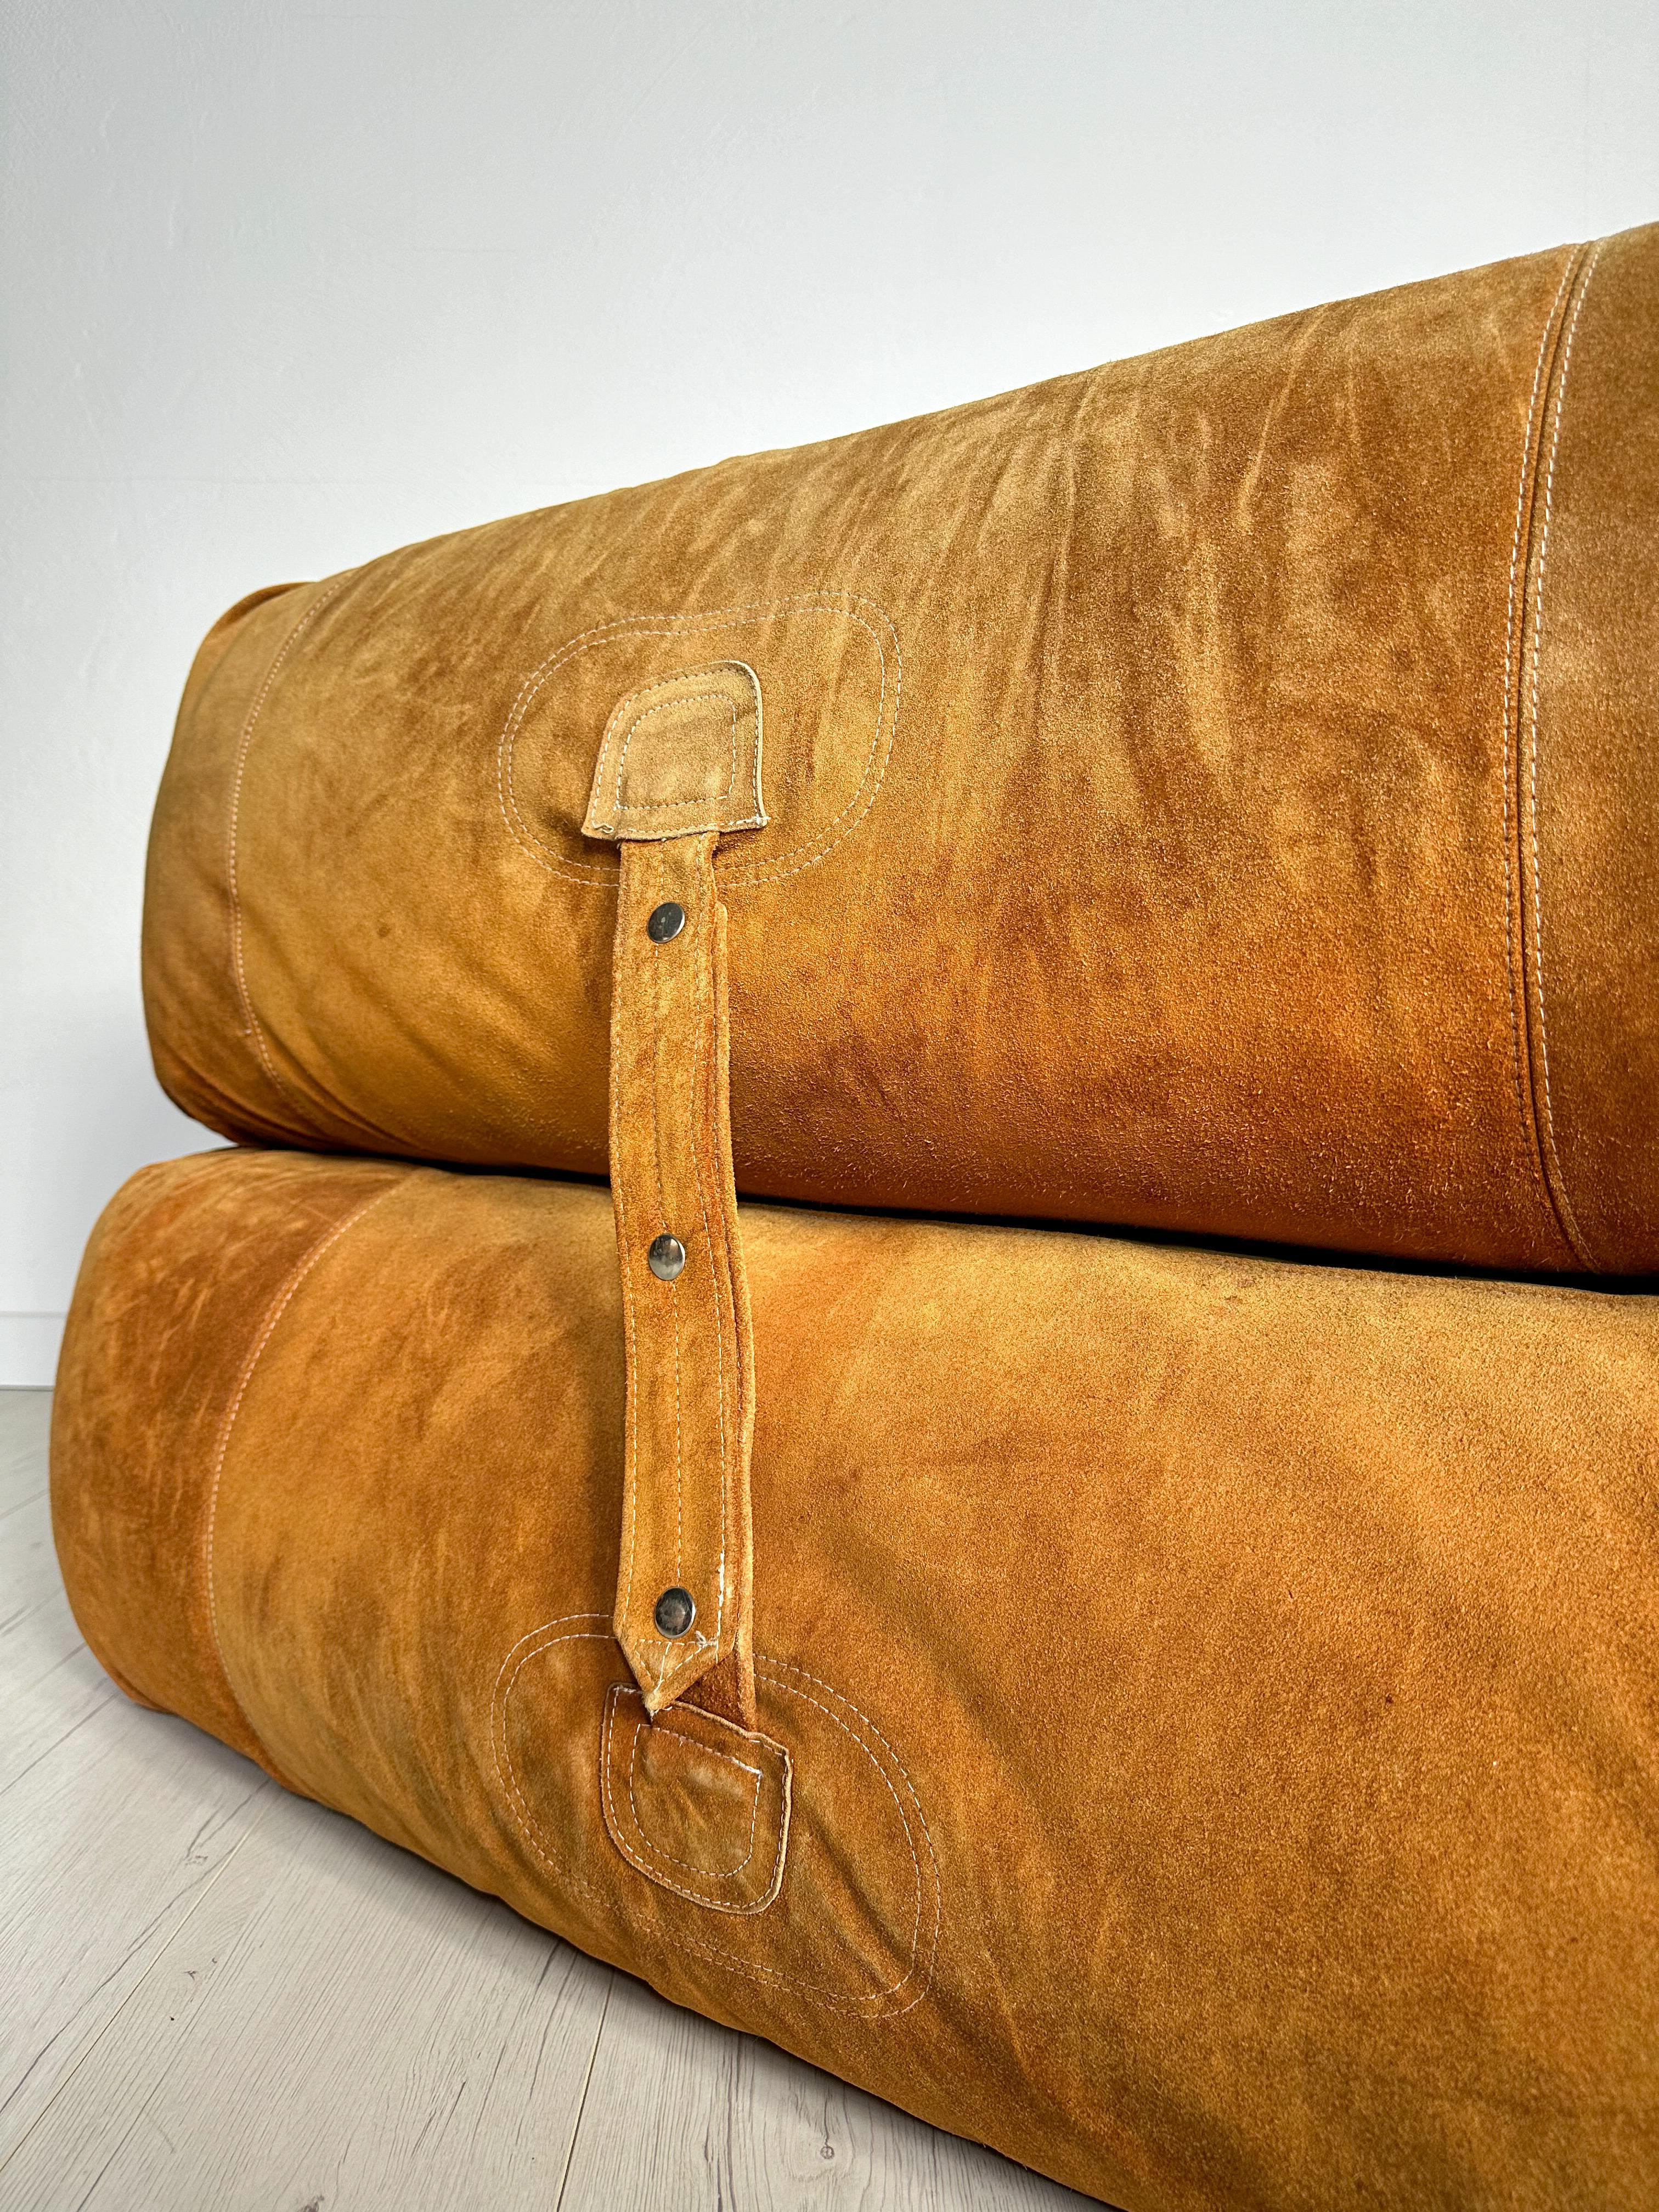 Vintage Suede 3-Seater Anfibio Sofa Bed by Alessandro Becchi for Giovannetti 70s For Sale 5